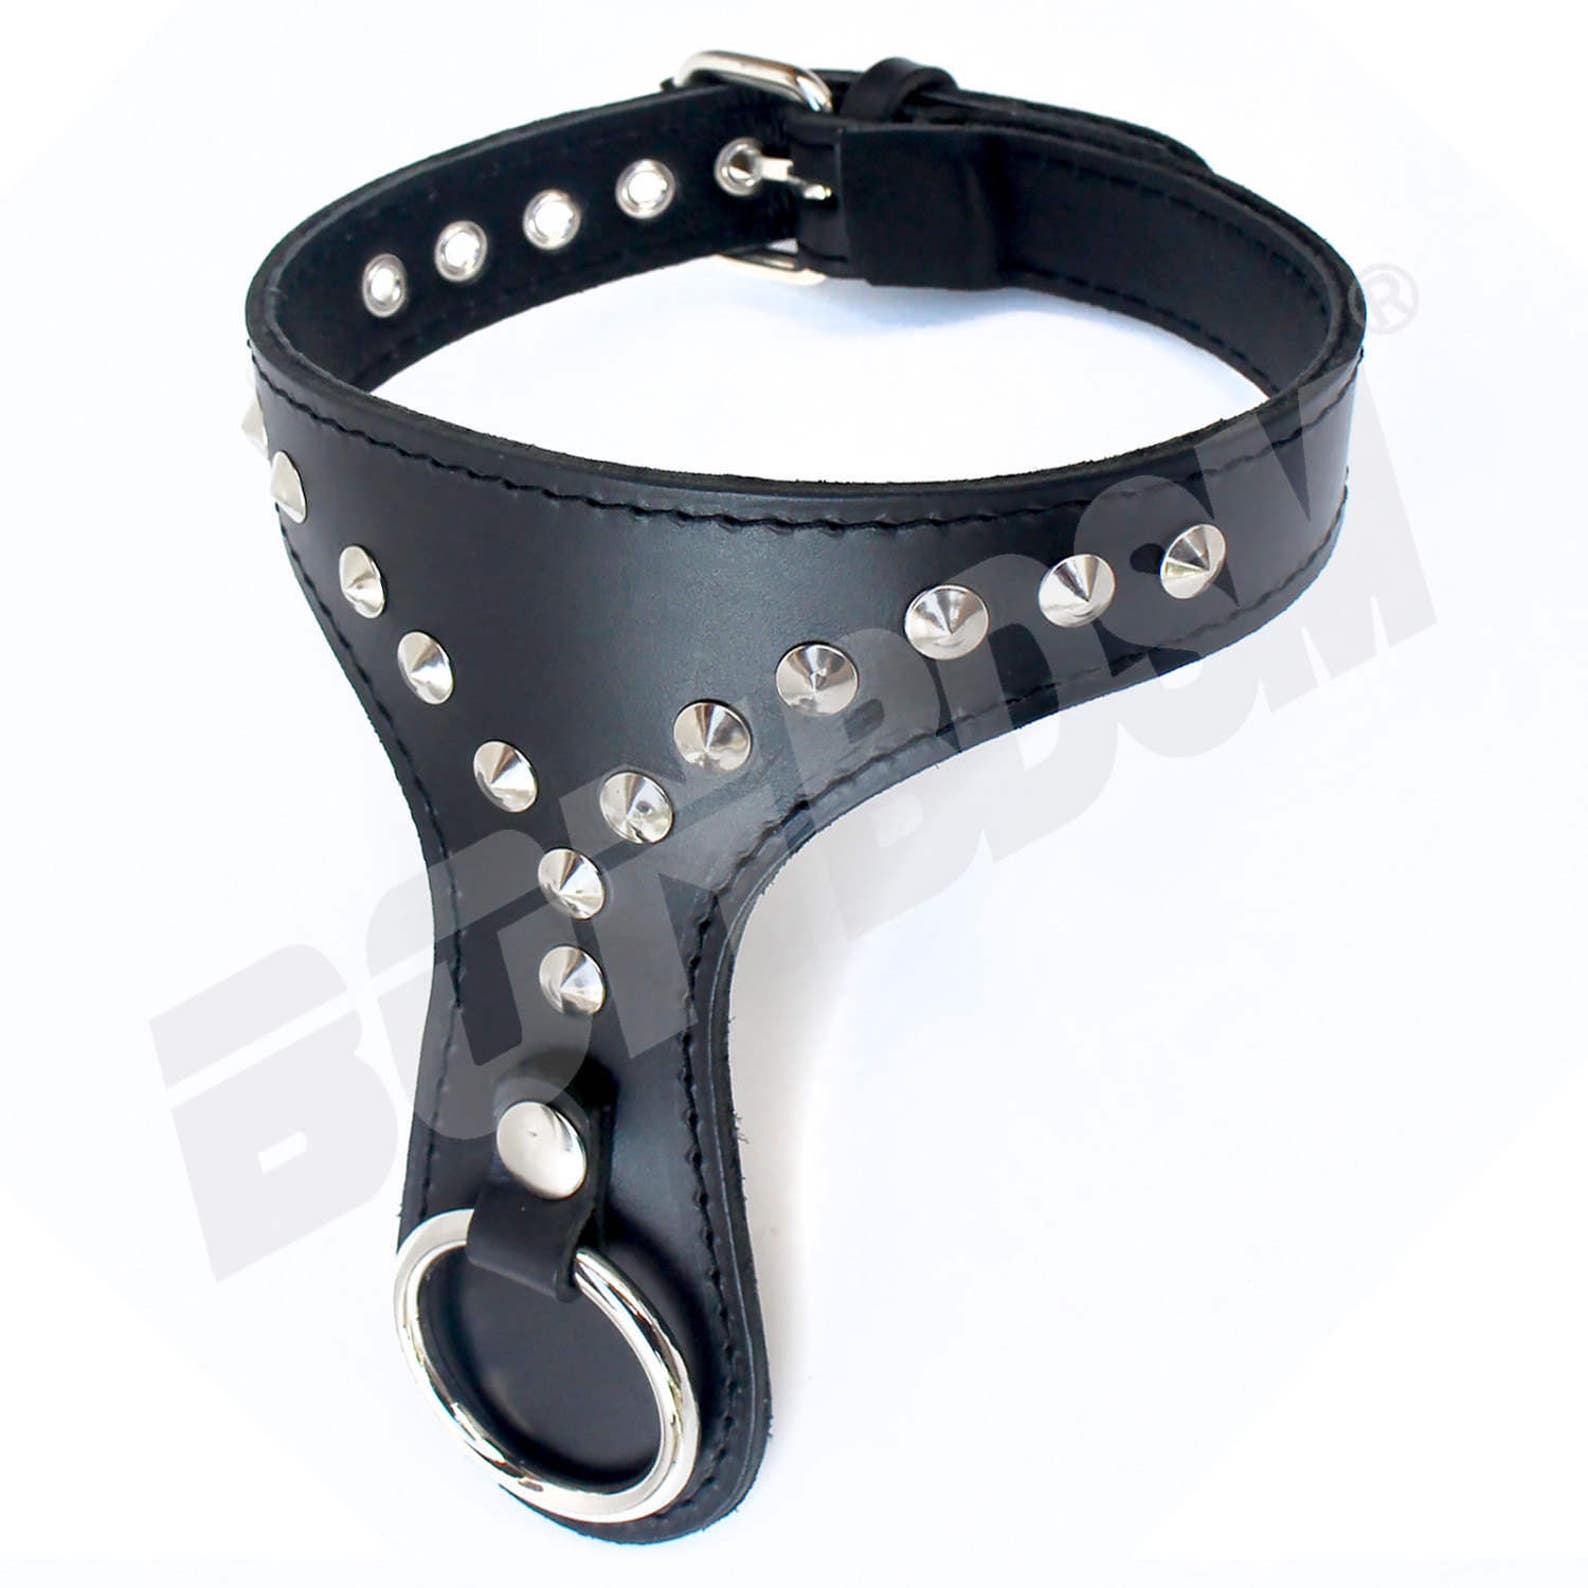 History of the choke chain as a collar bdsm